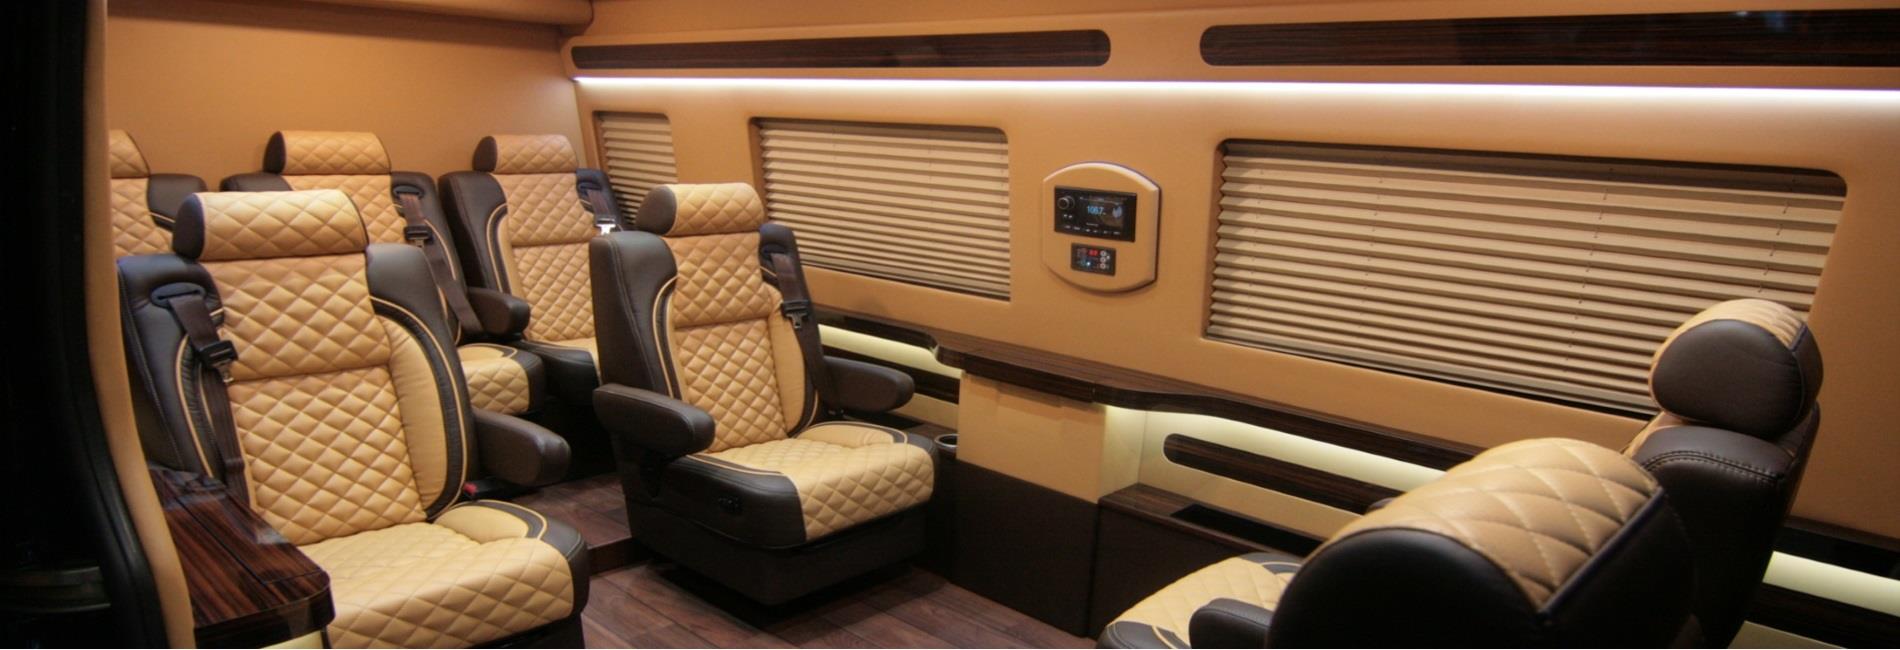 A sophisticated and chic travel space able of accommodating a large group of passengers.